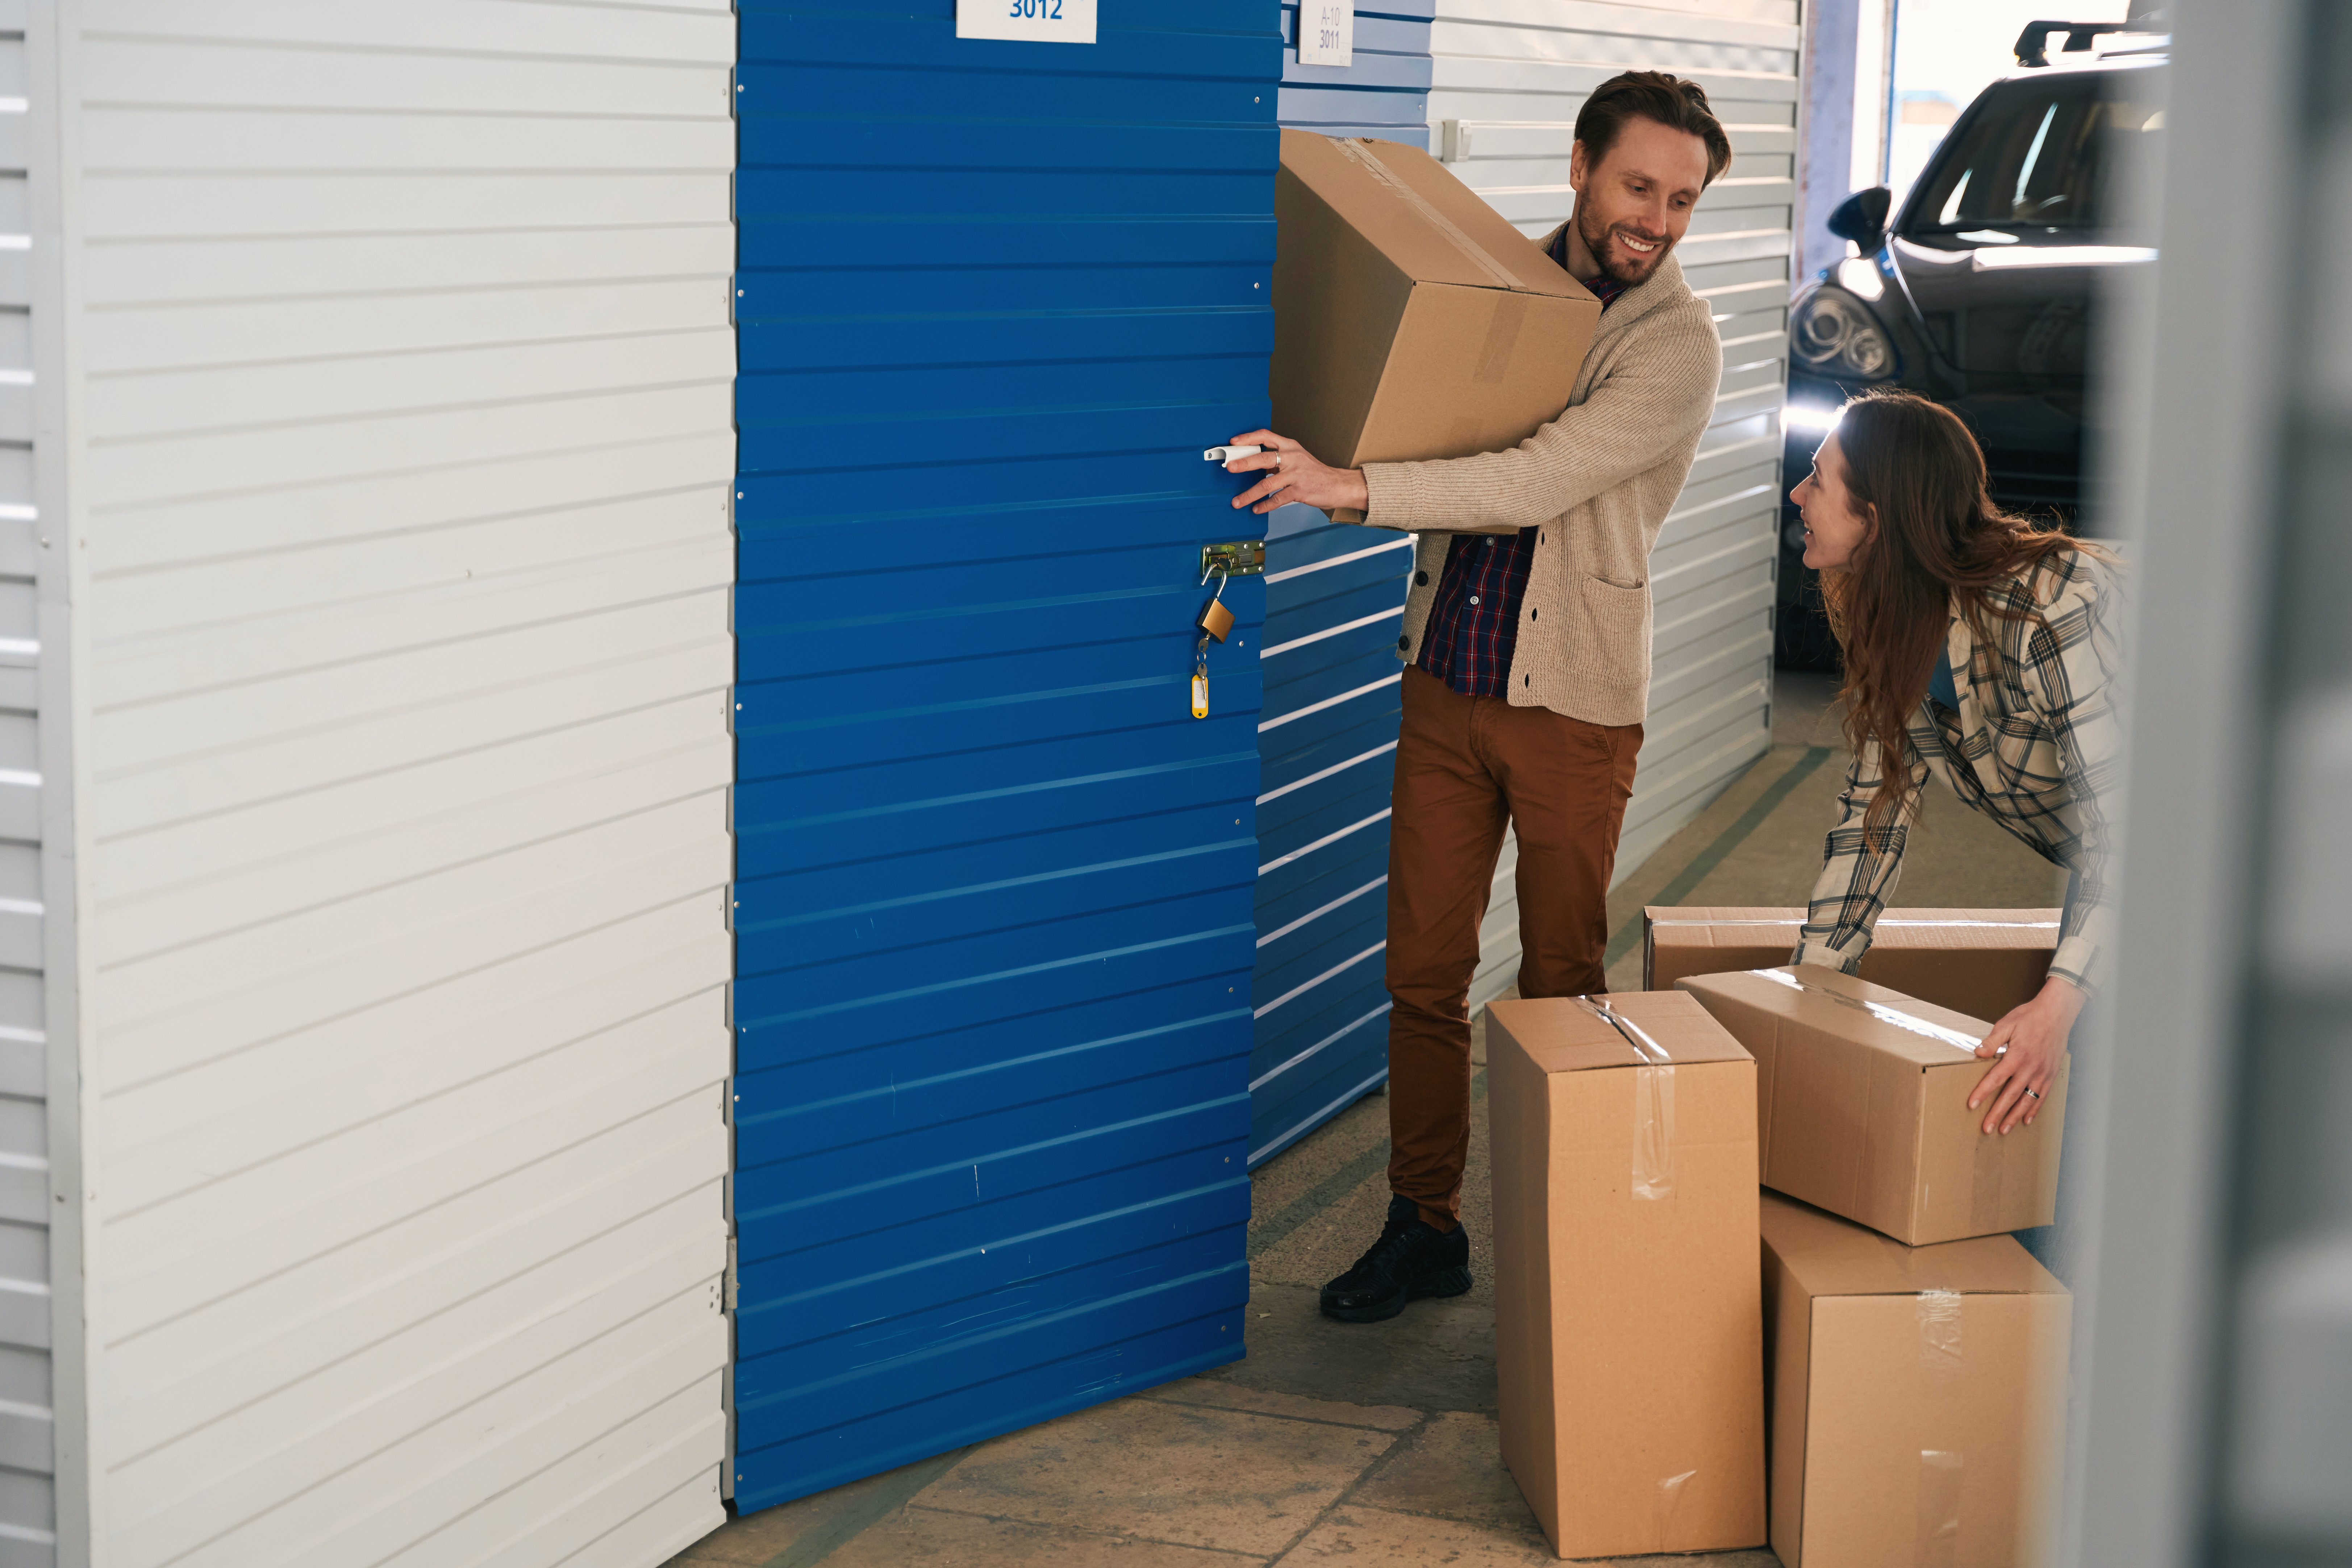 An image of a couple placing items in a small storage unit.